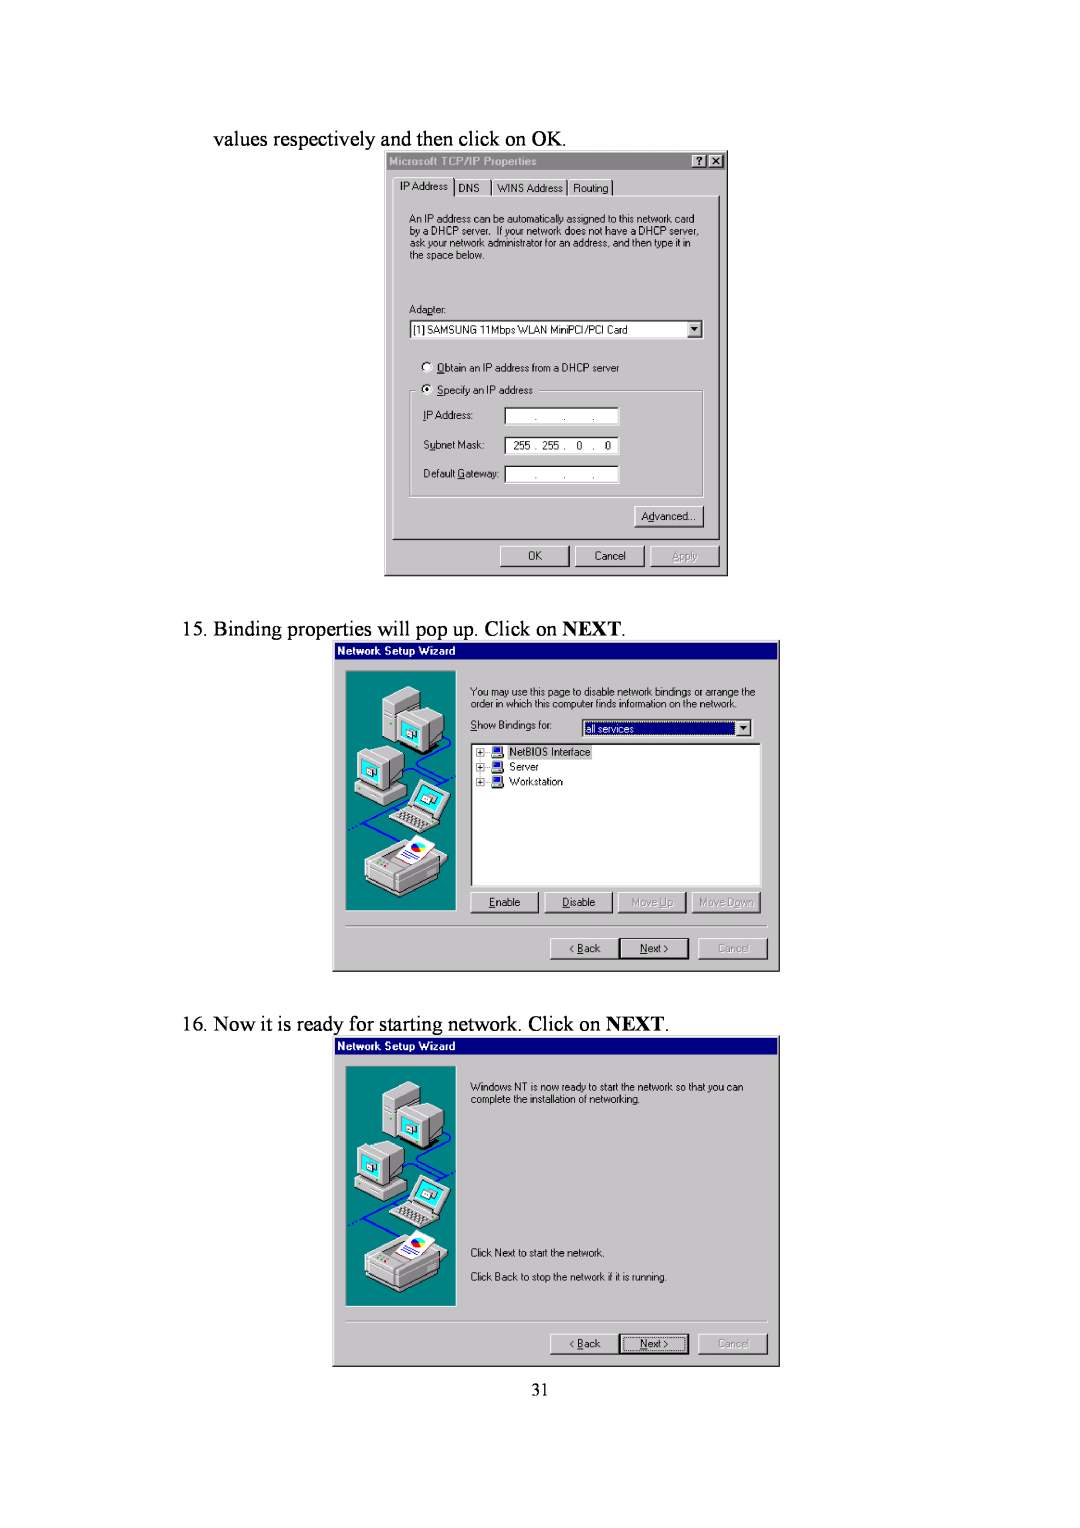 Samsung SWL-2210P, SWL-2210M values respectively and then click on OK, Binding properties will pop up. Click on NEXT 